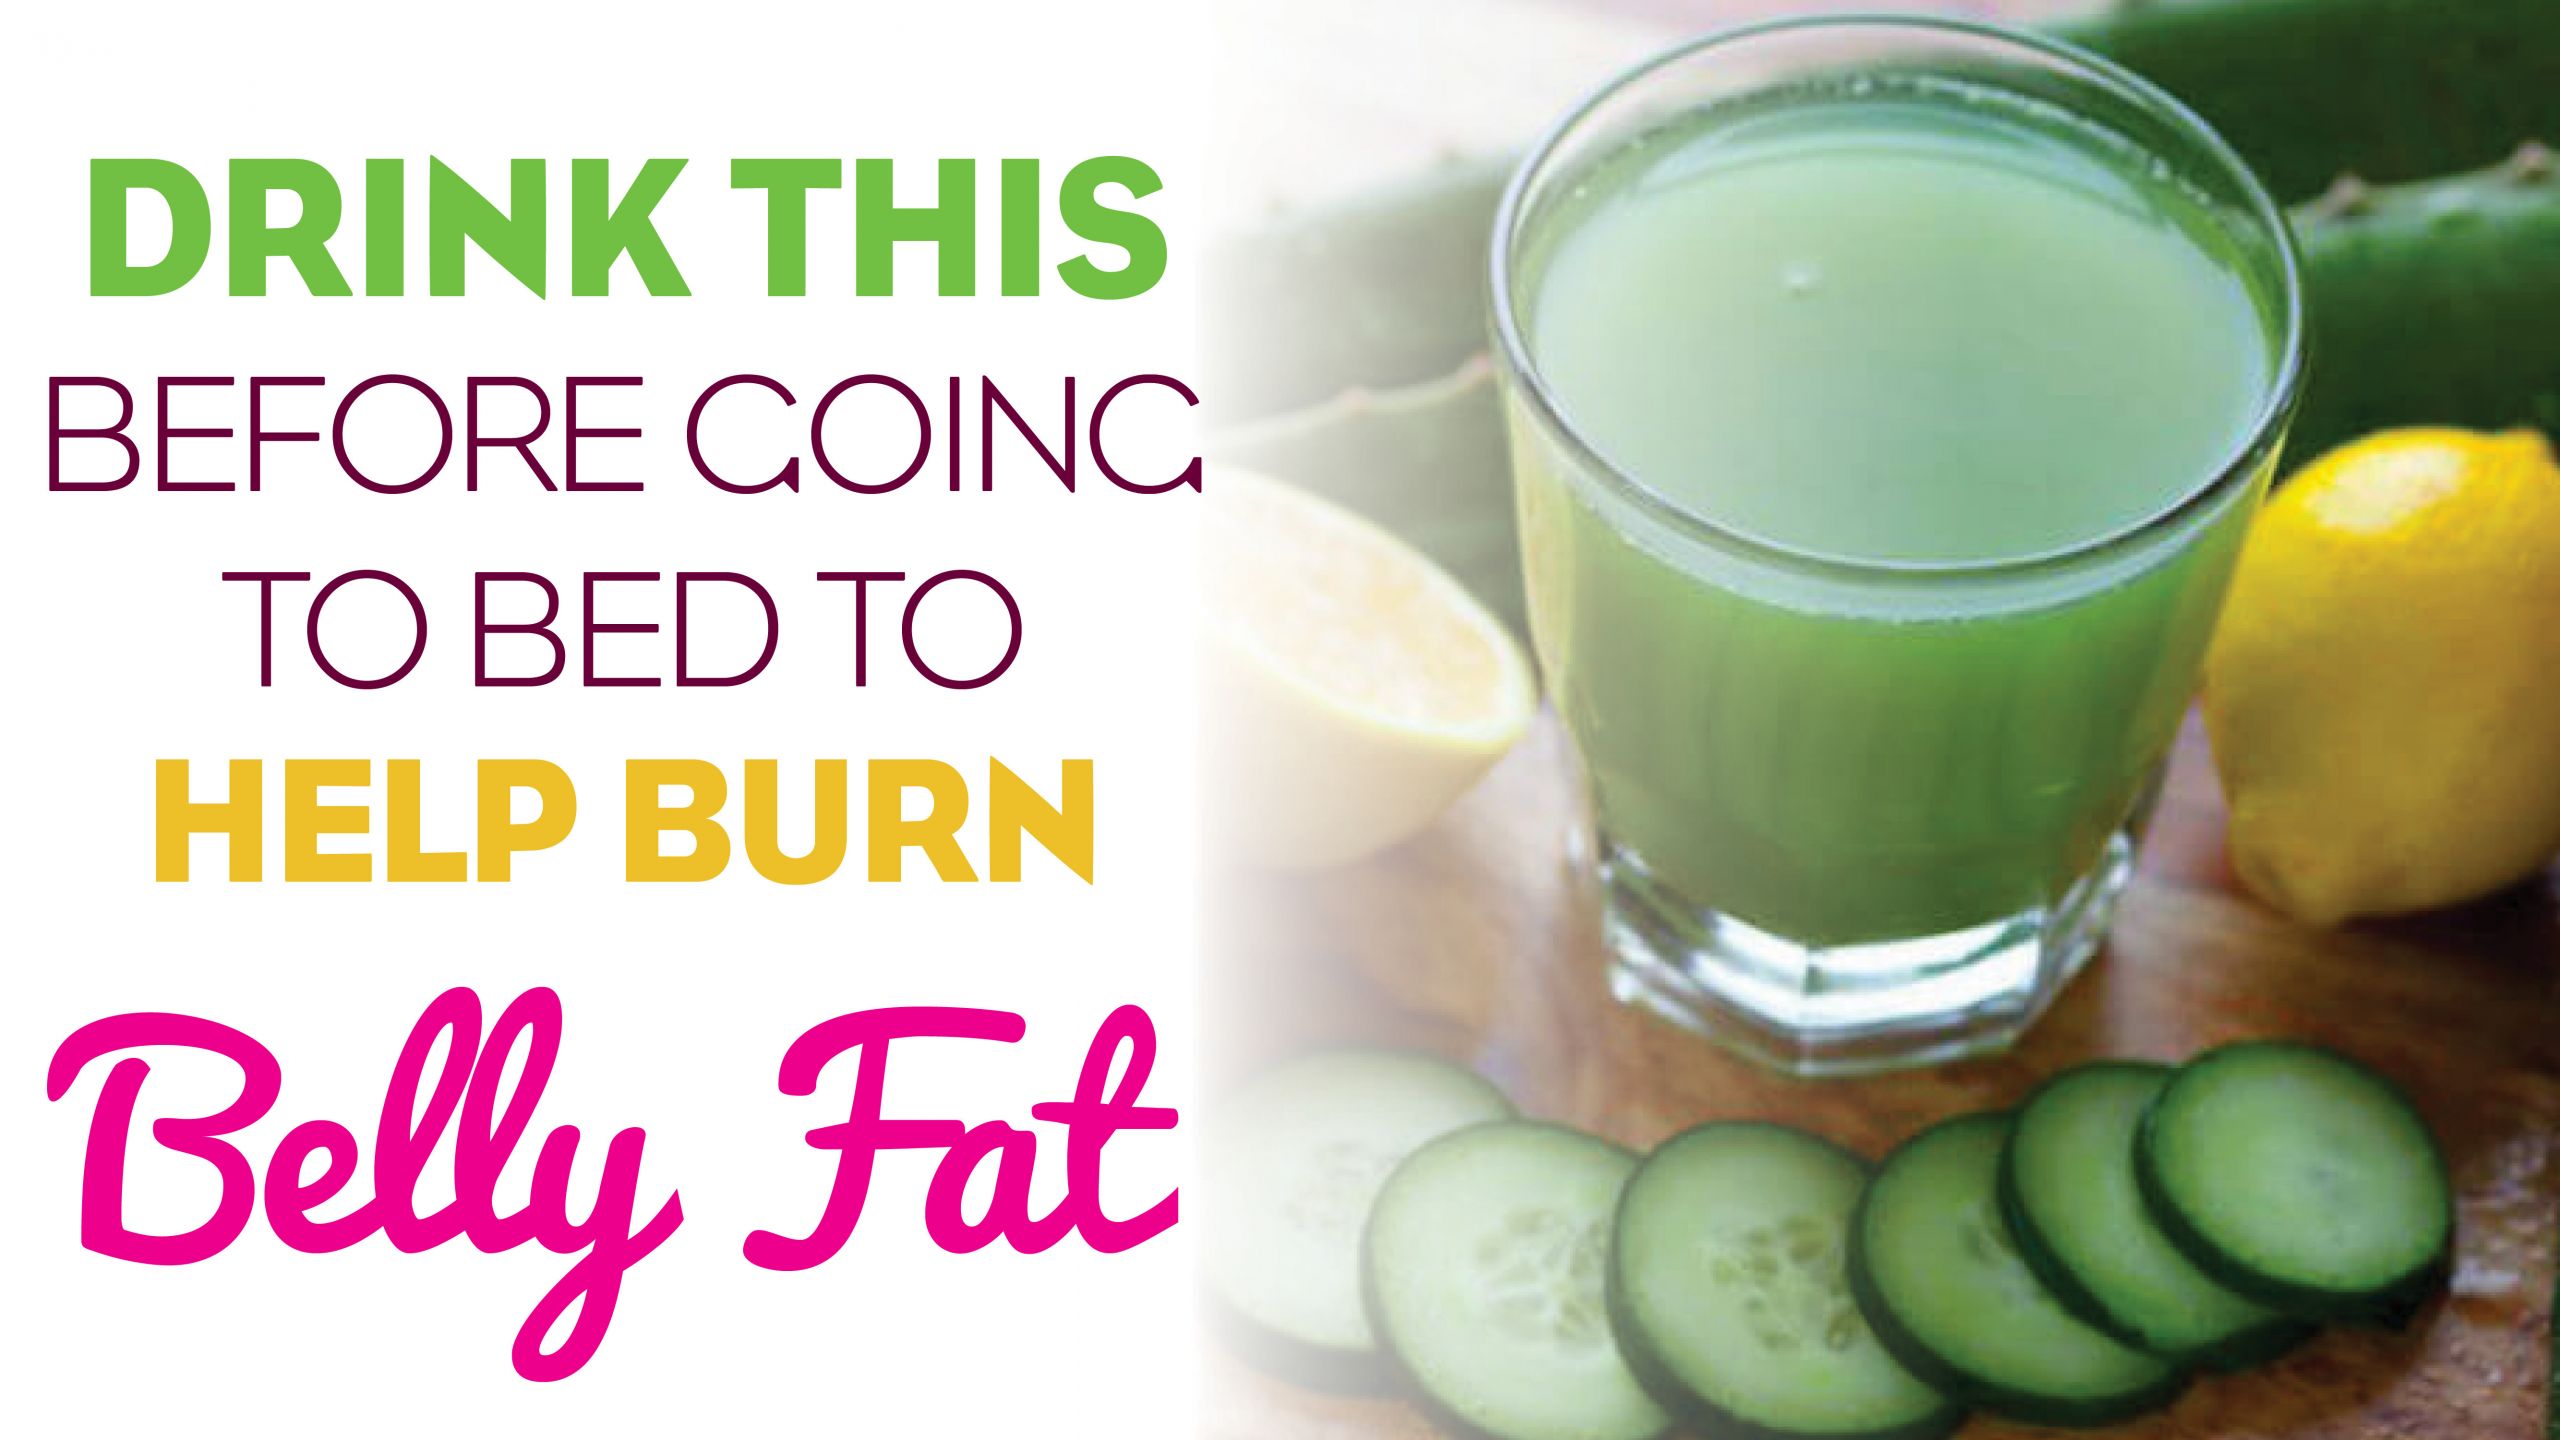 Drink This Before Going To Bed Burn Belly Fat
 Drink this Fat Burning Drink Before Going to Bed and Burn